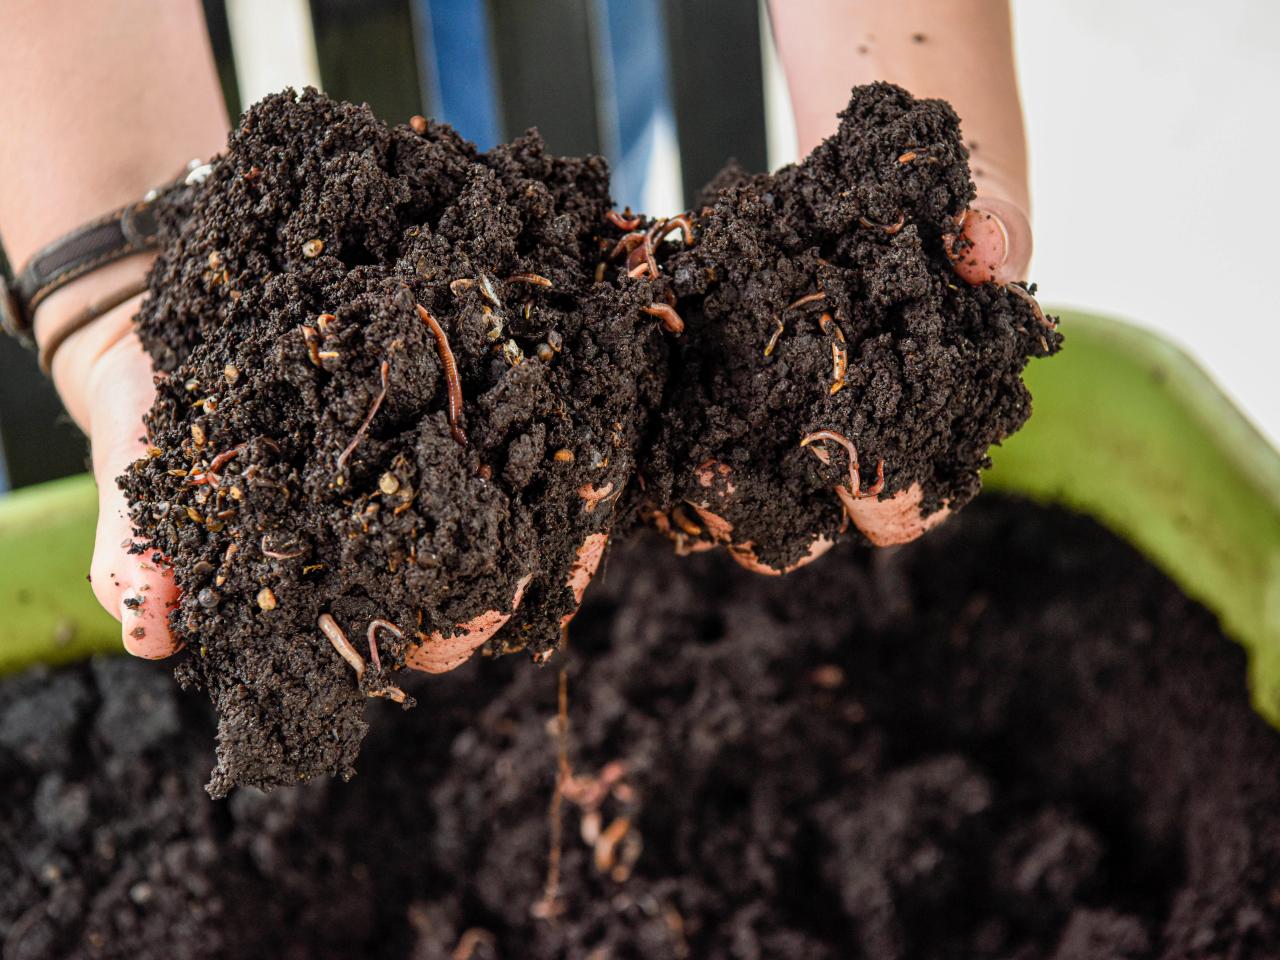 Compost Tools for Better, Faster Compost - Compost Magazine